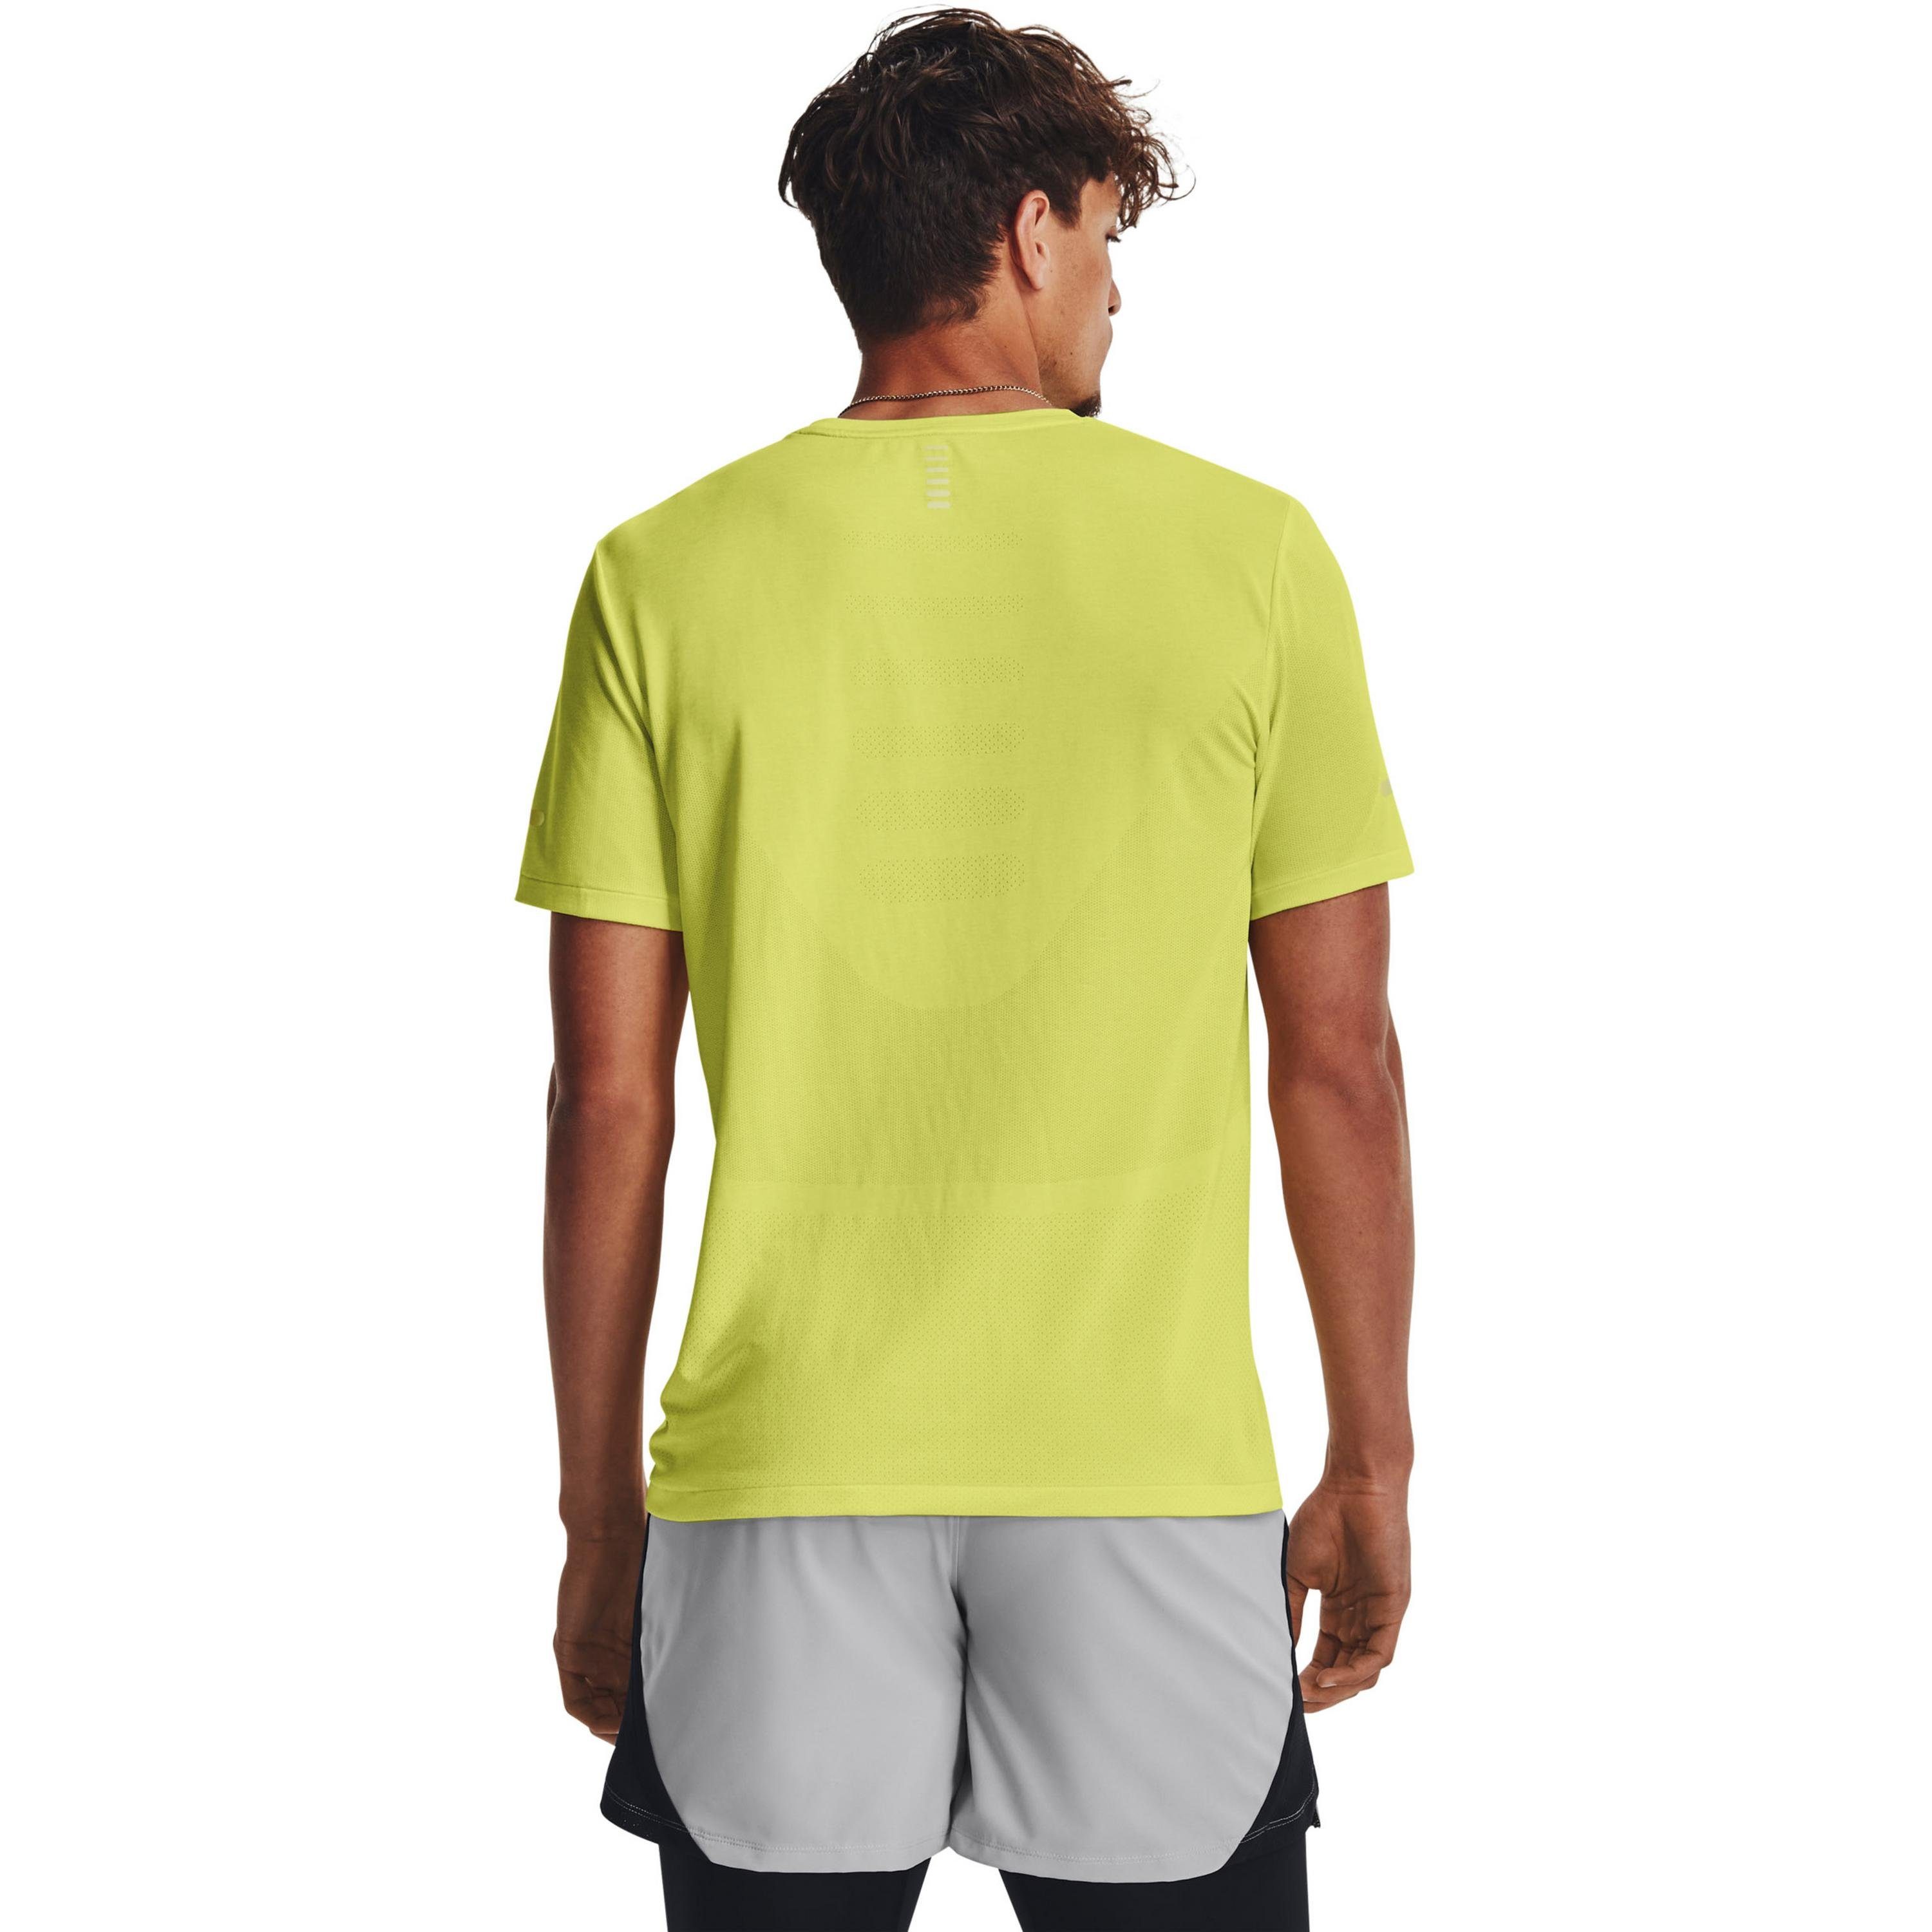 Under Armour® Funktionsshirt SEAMLESS STRIDE yellow lime